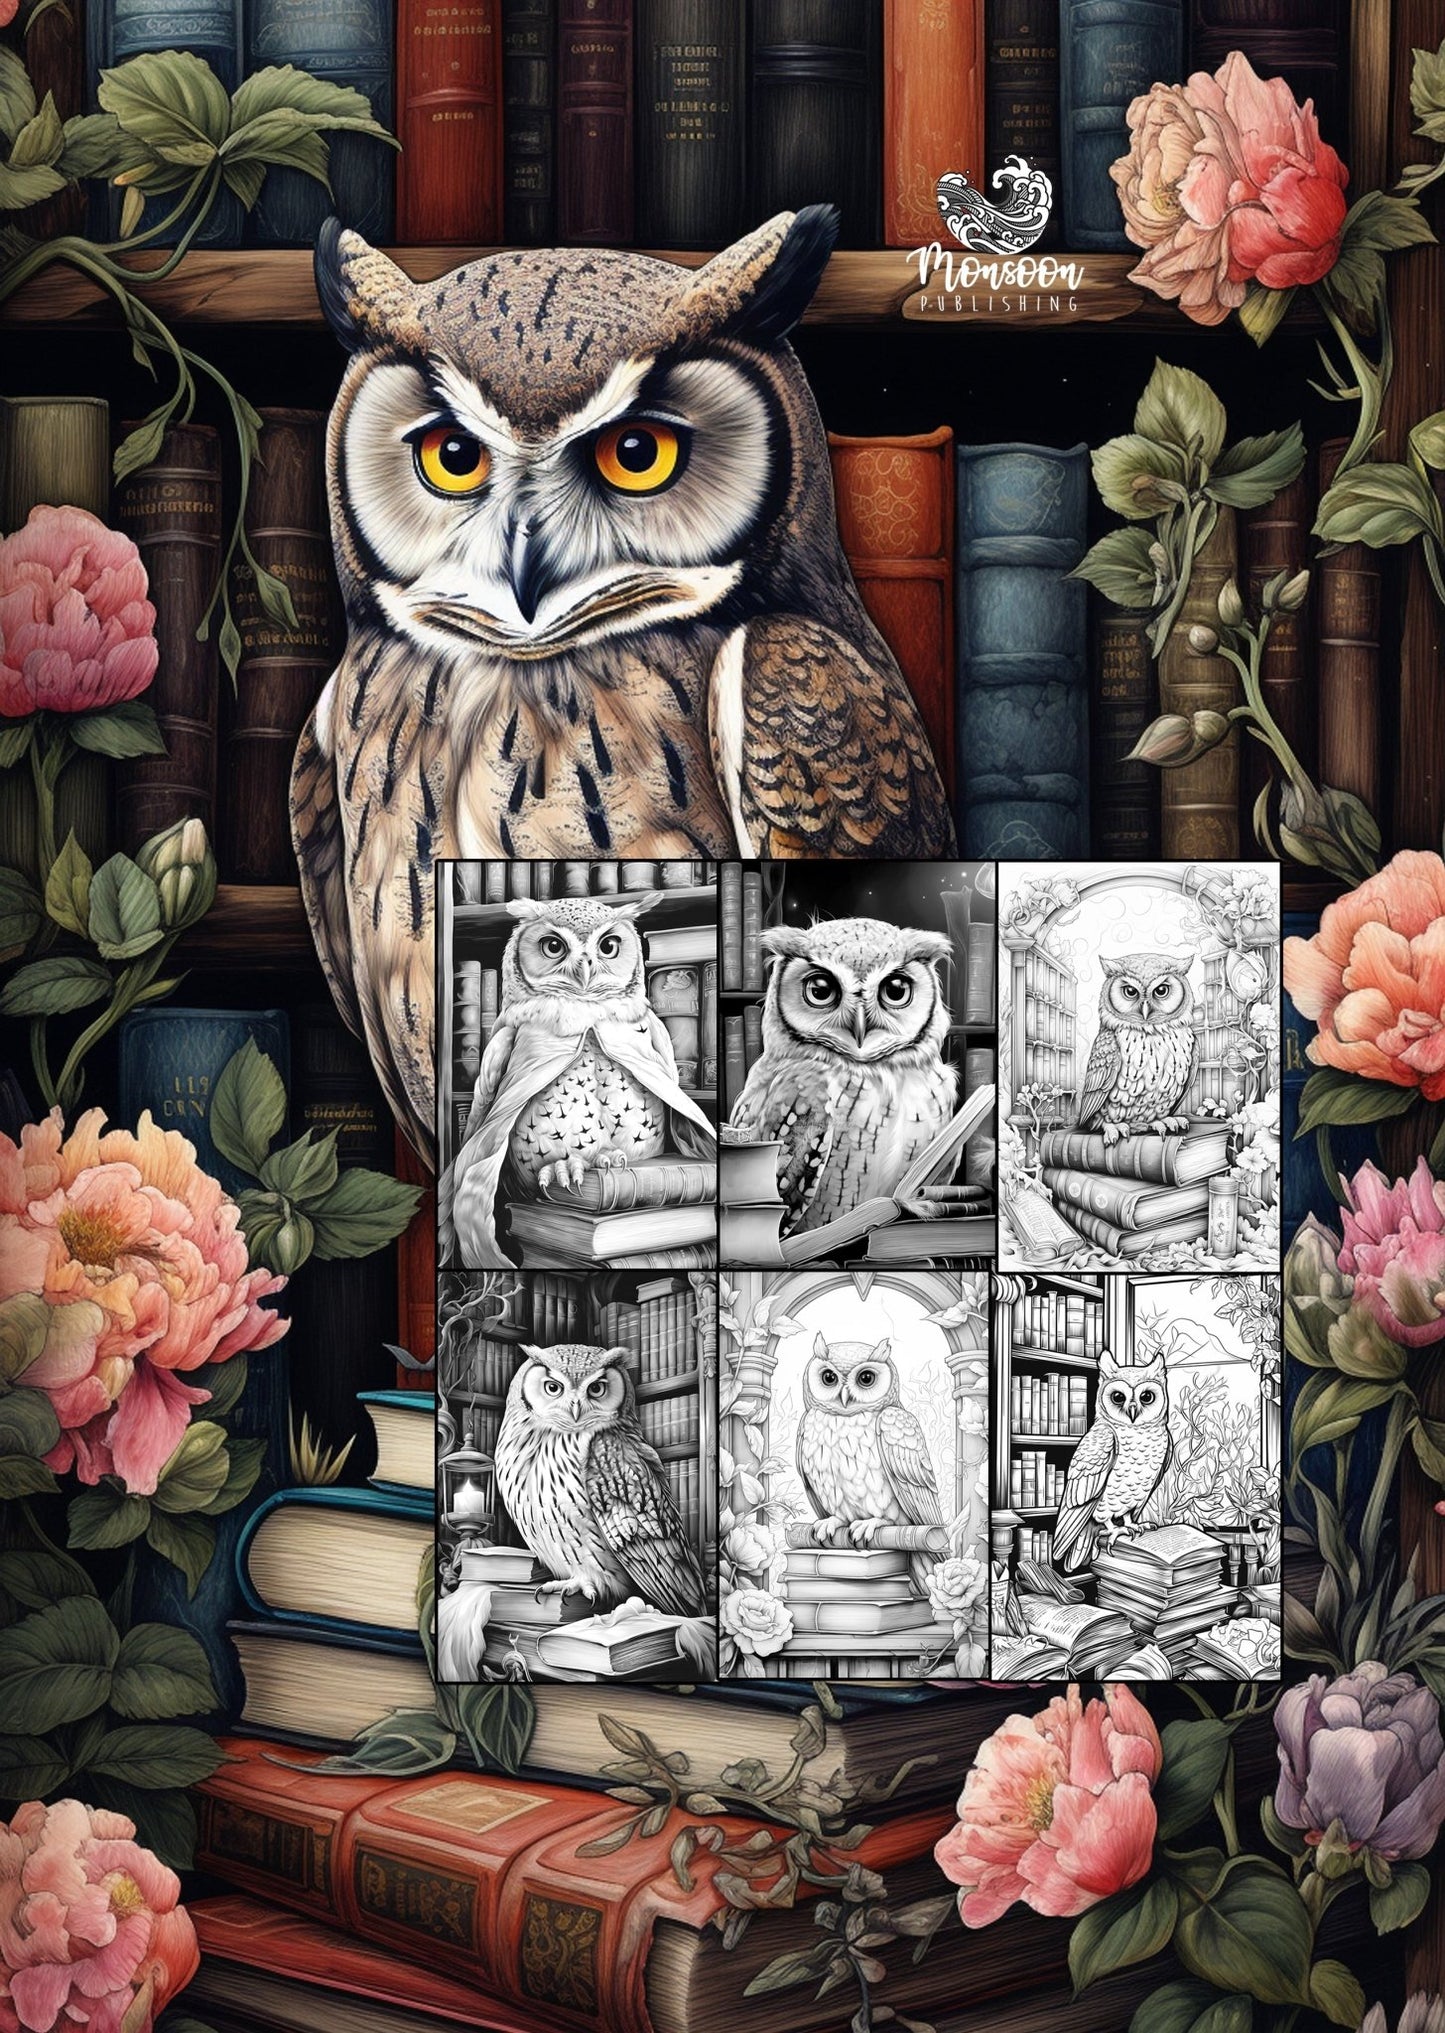 Library Owls Coloring Book Grayscale (Printbook) - Monsoon Publishing USA